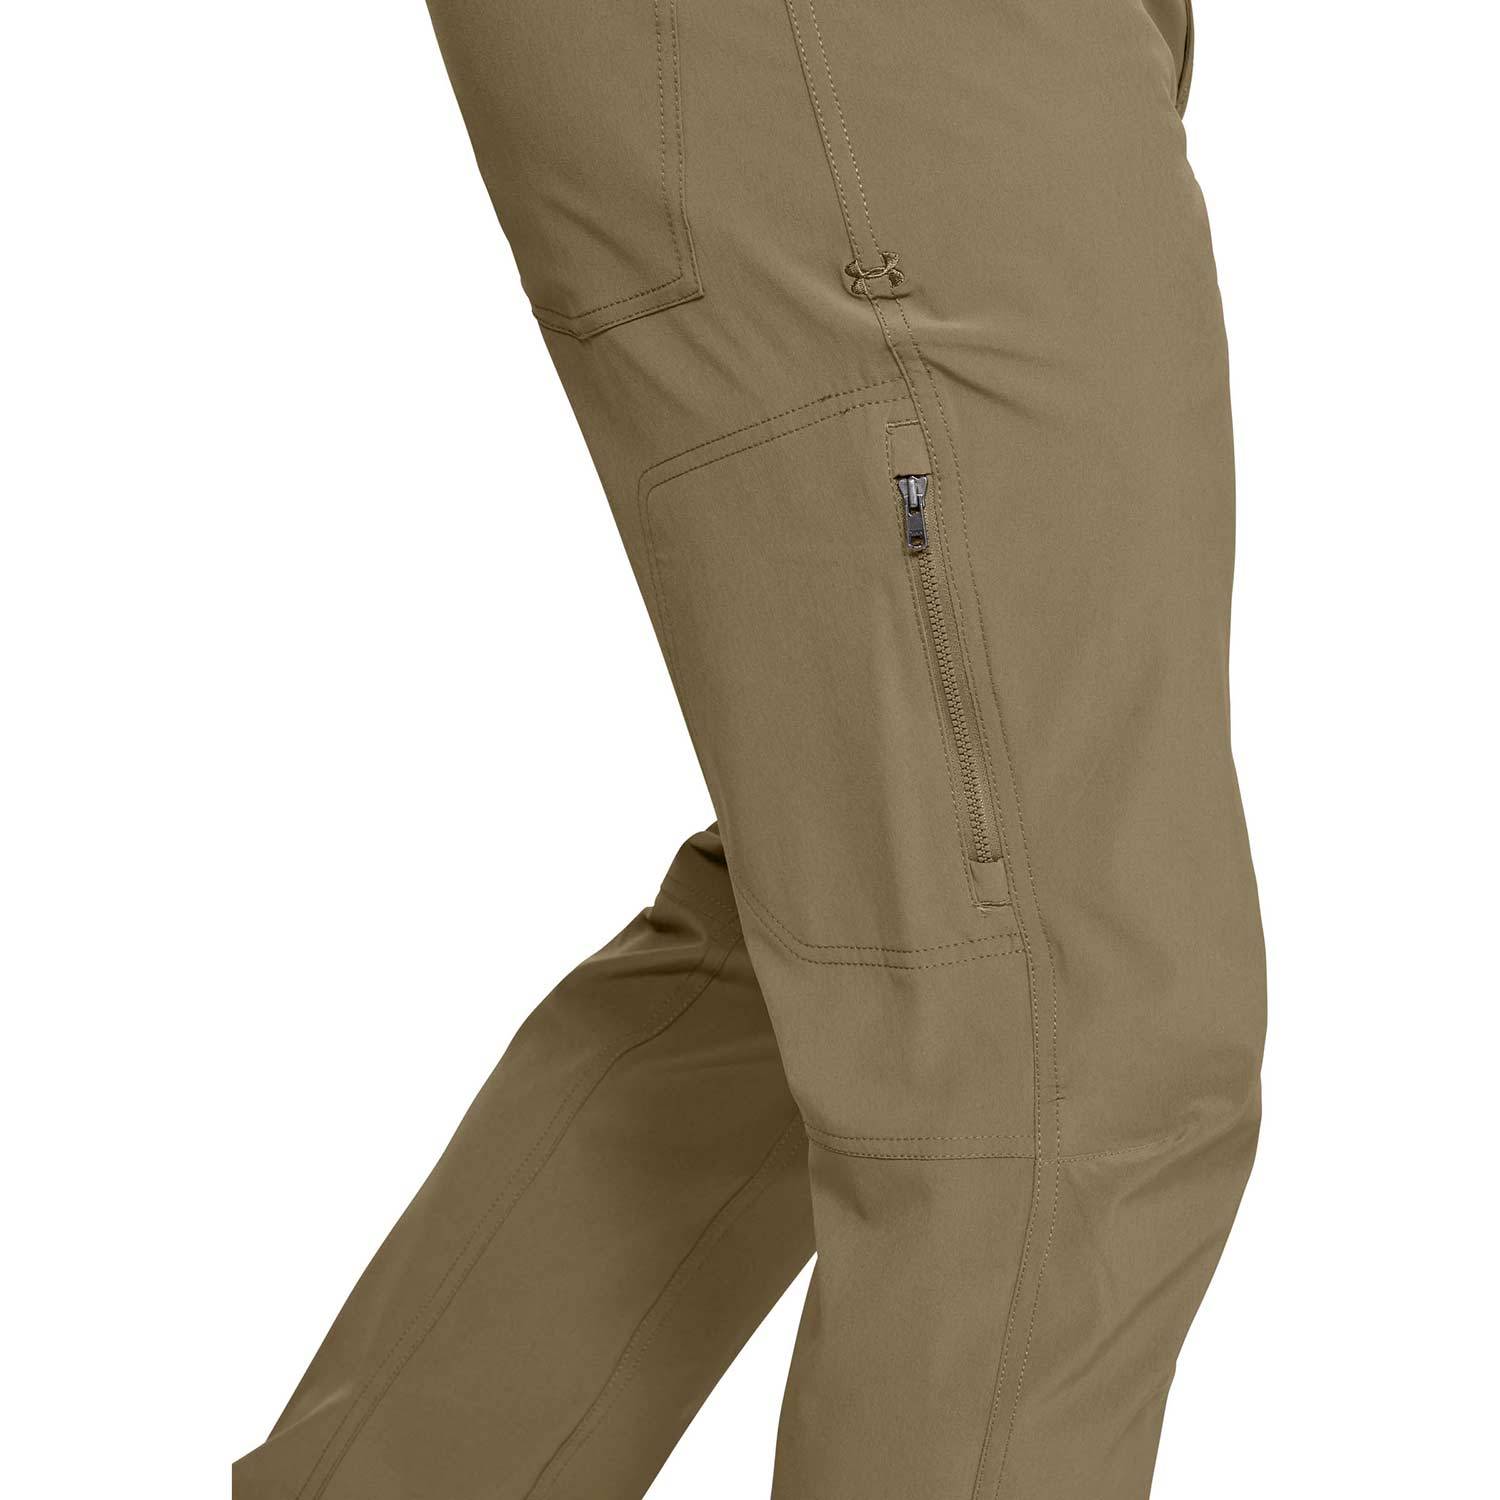 Under Armour Offers New Tactical Pants